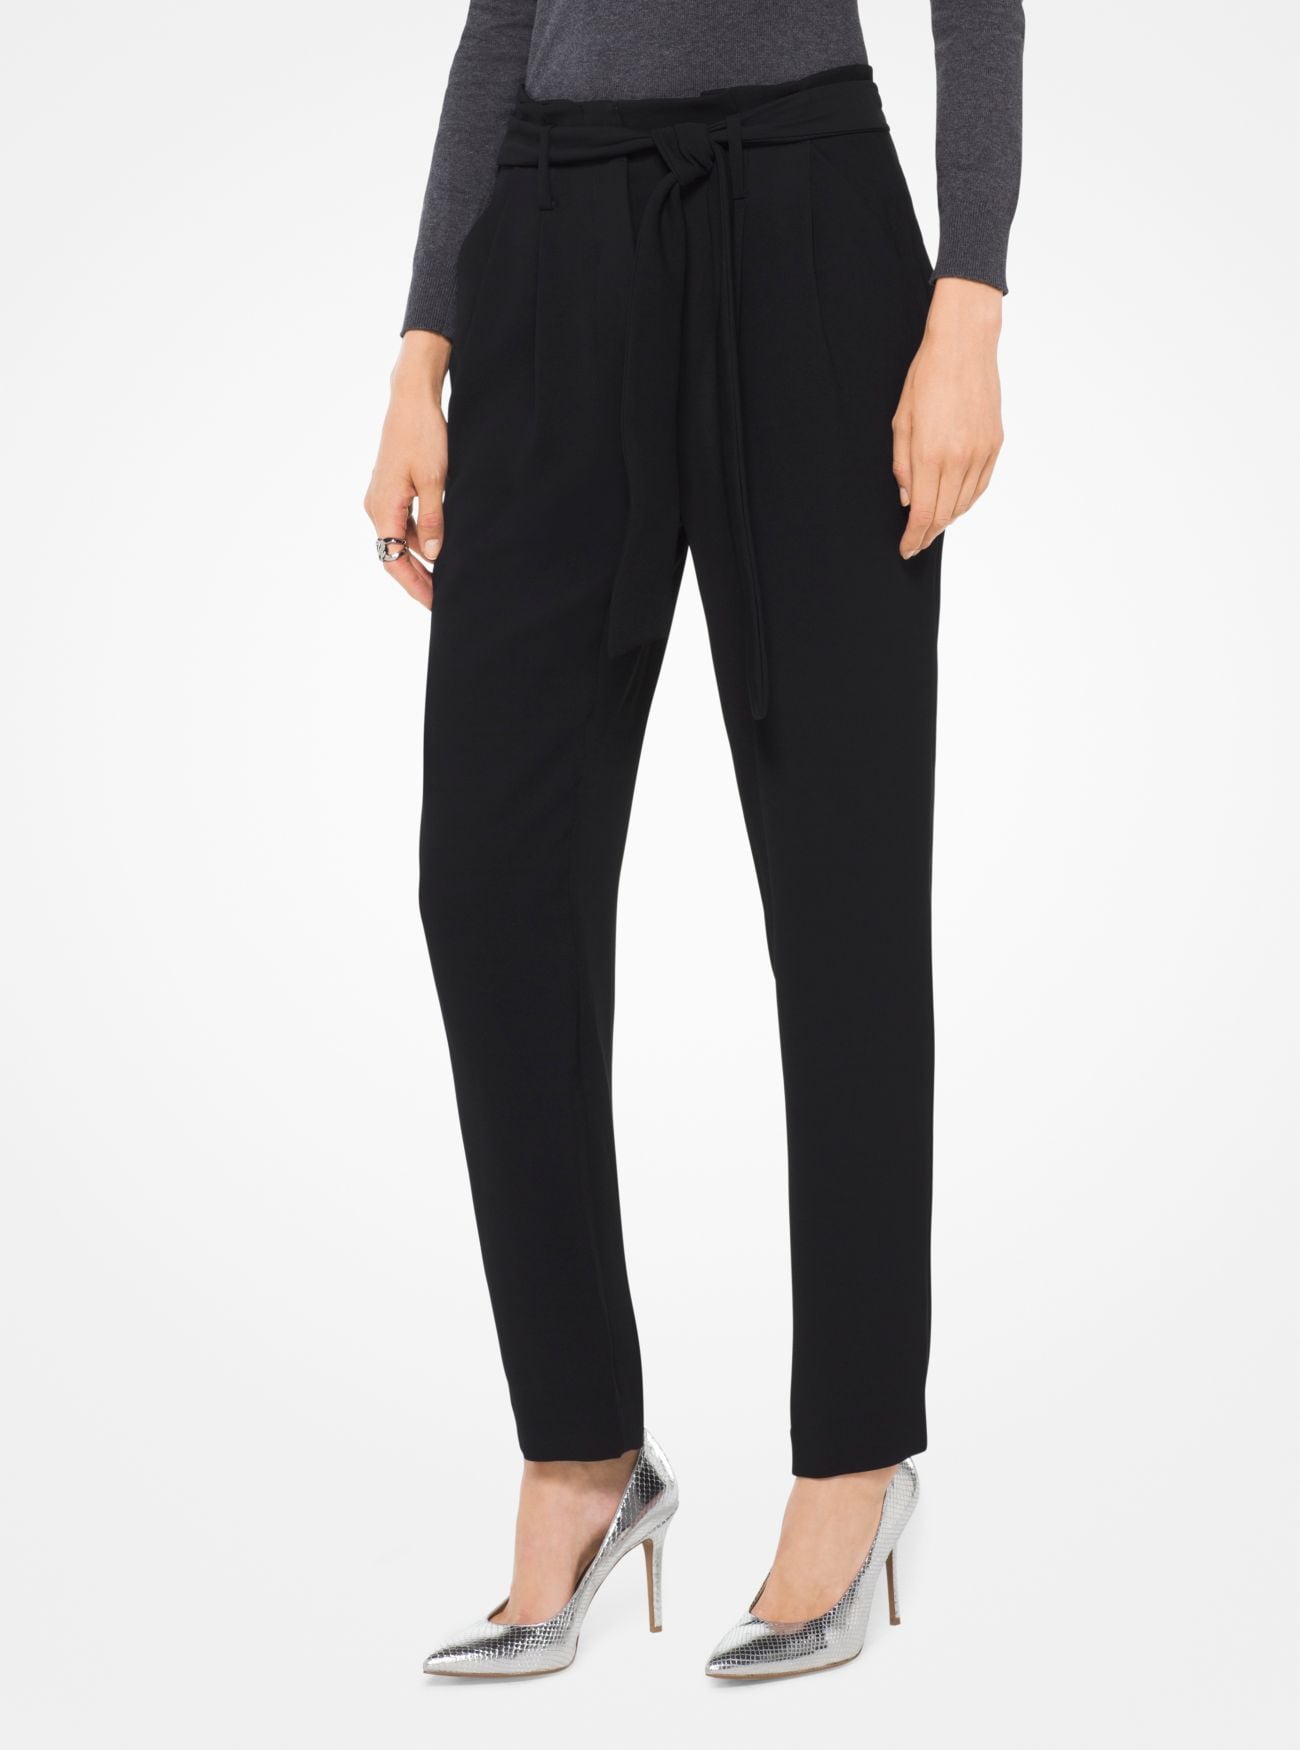 Michael Michael Kors Cady Pleated Trousers | The Best Black Pants For Every  Body | POPSUGAR Fashion Photo 9